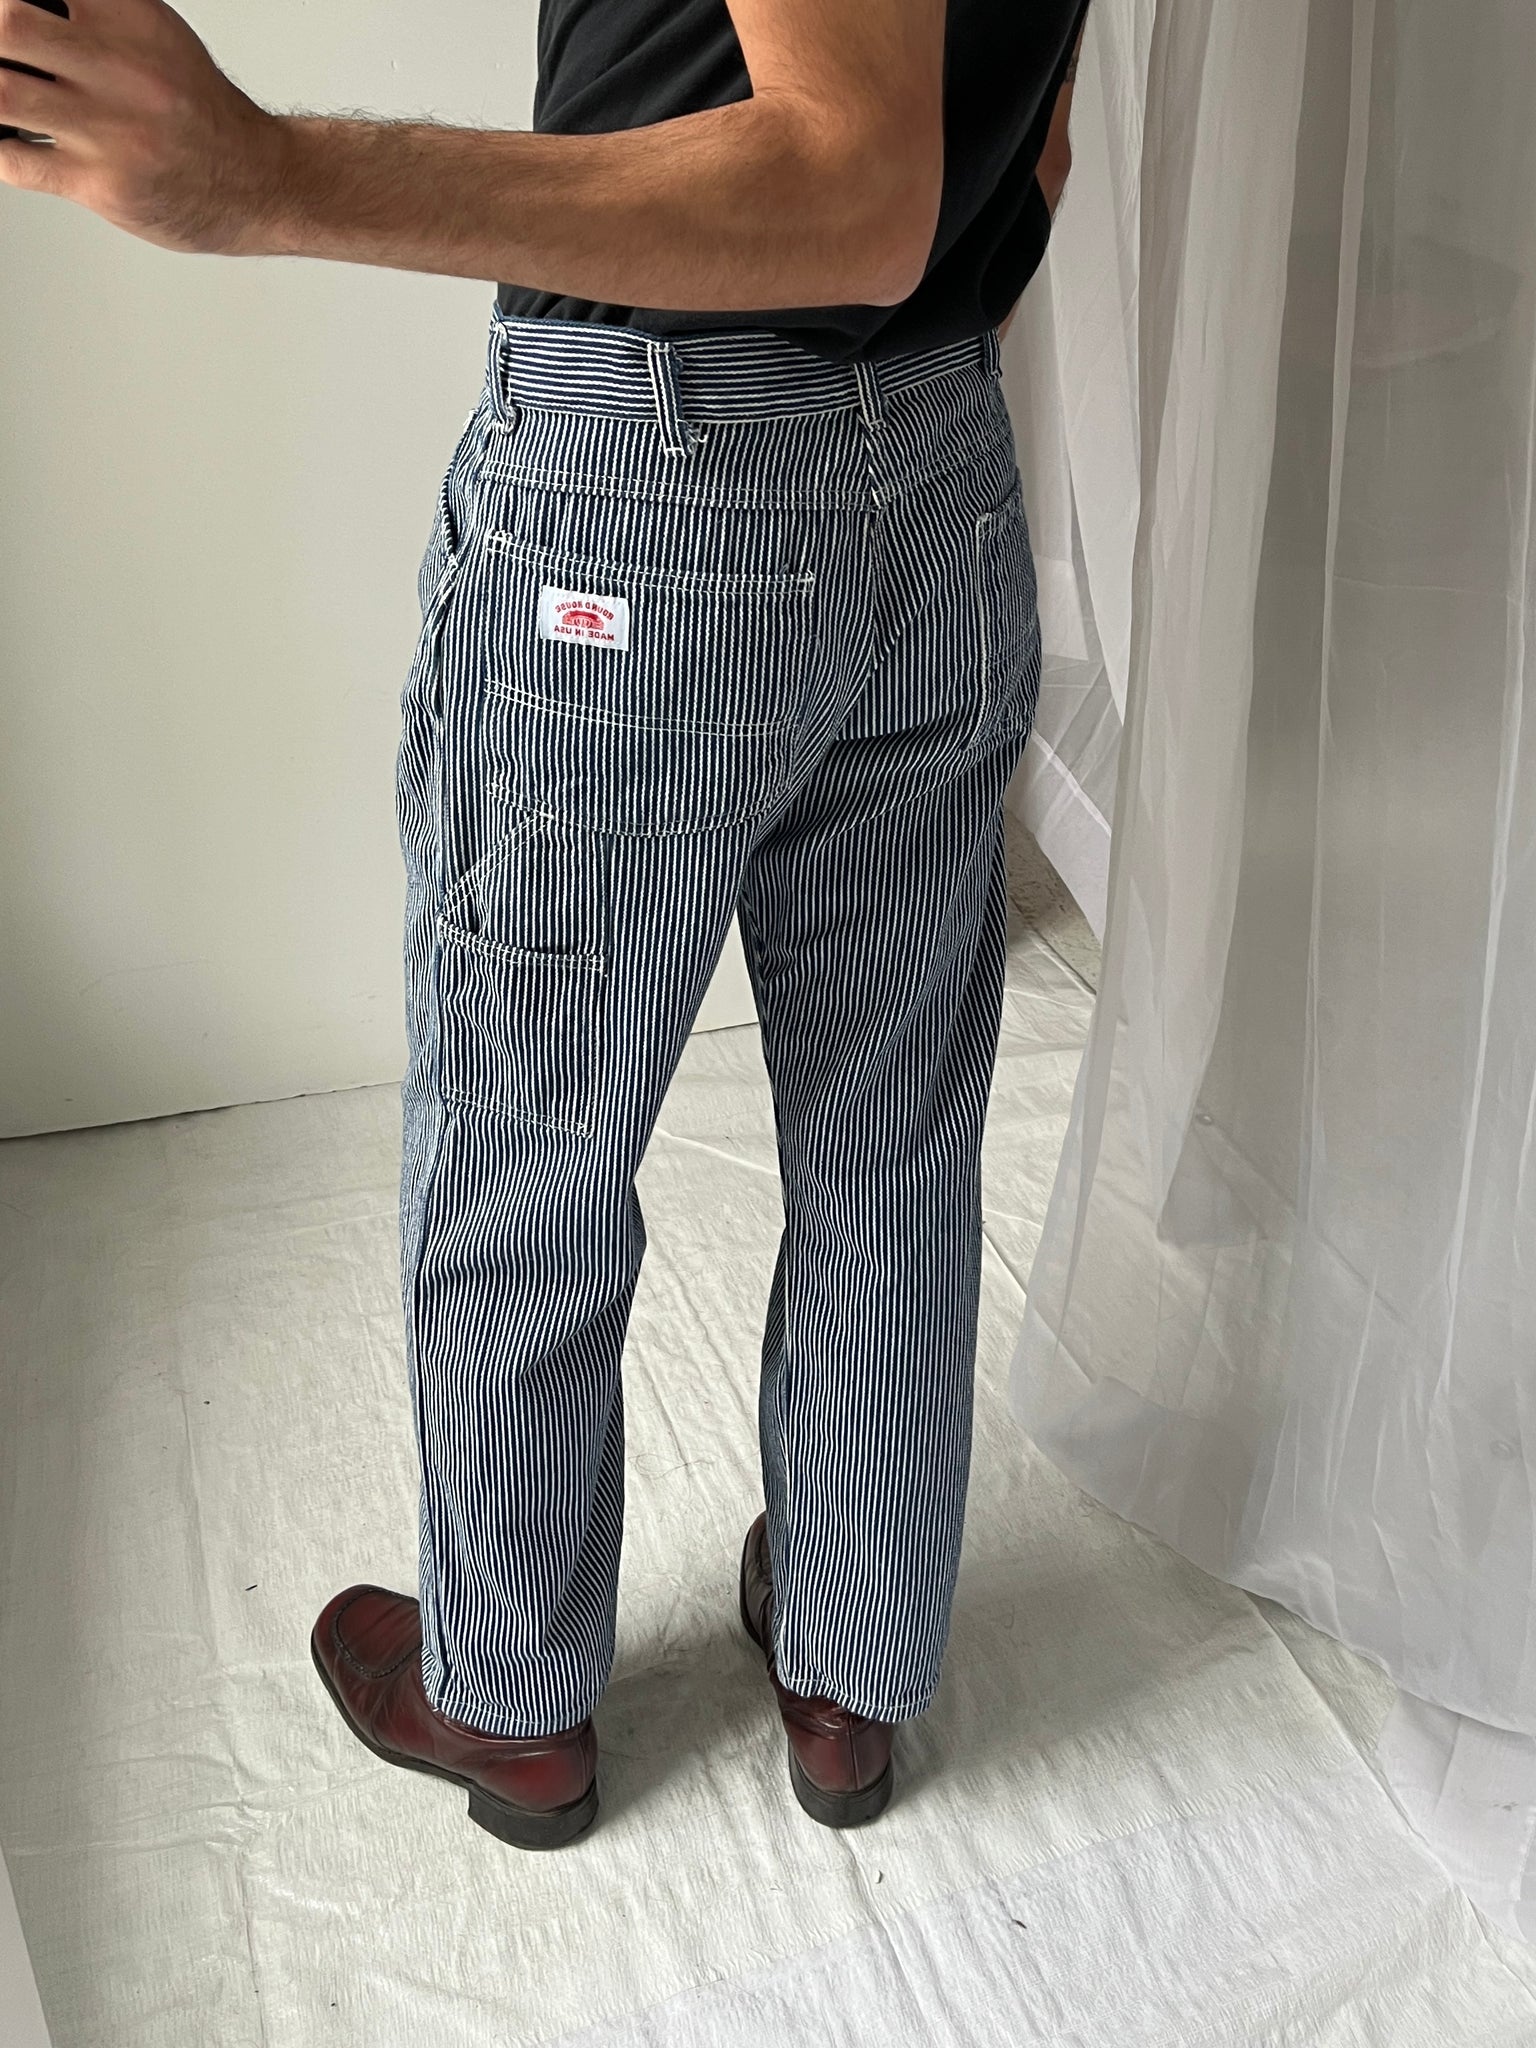 Roundhouse railroad trouser